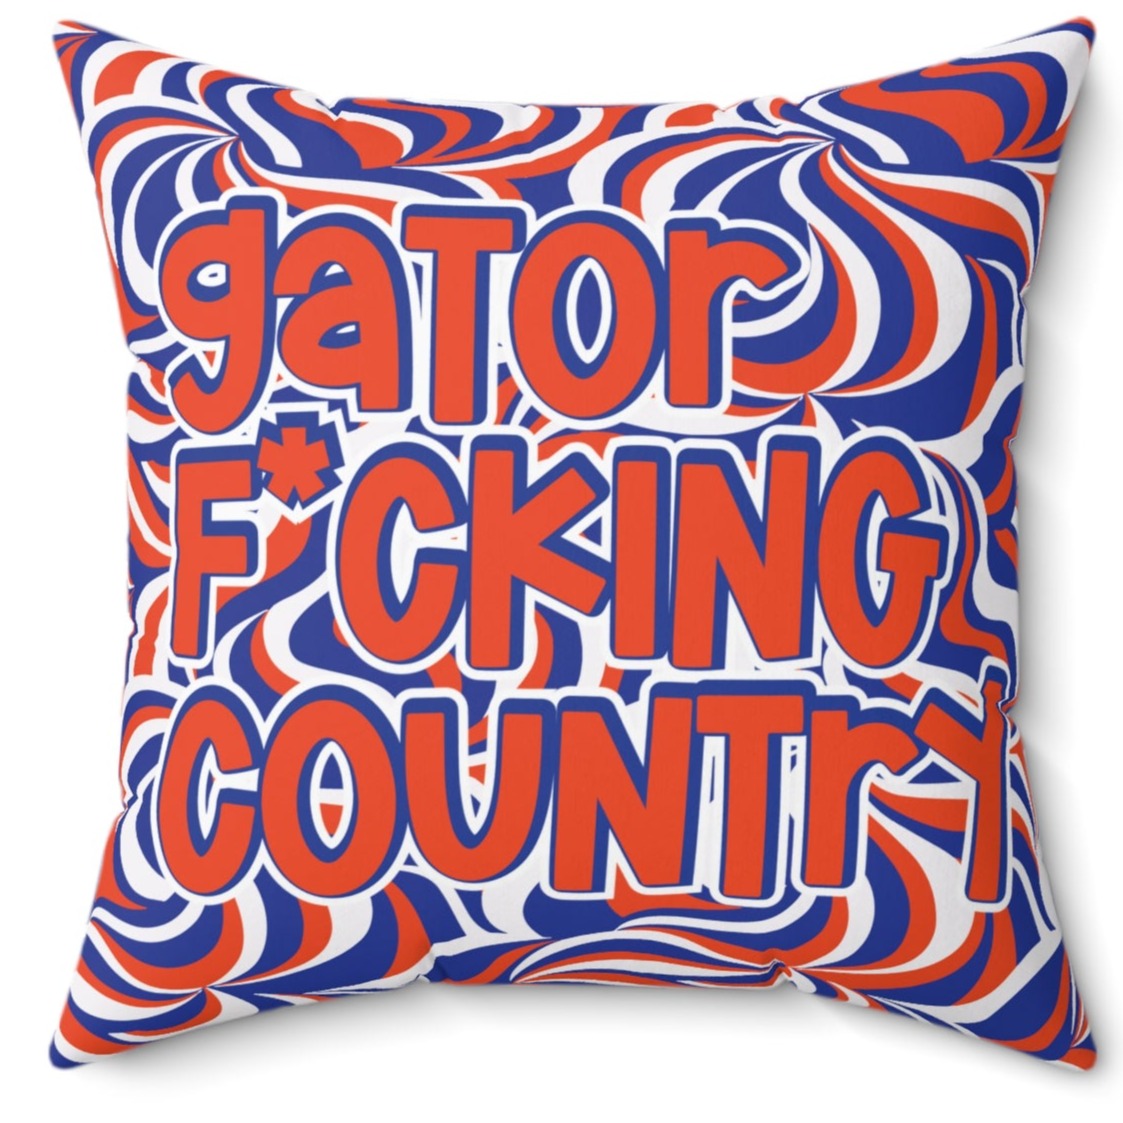 Gator F*cking Country Bed Party Pillow Cover